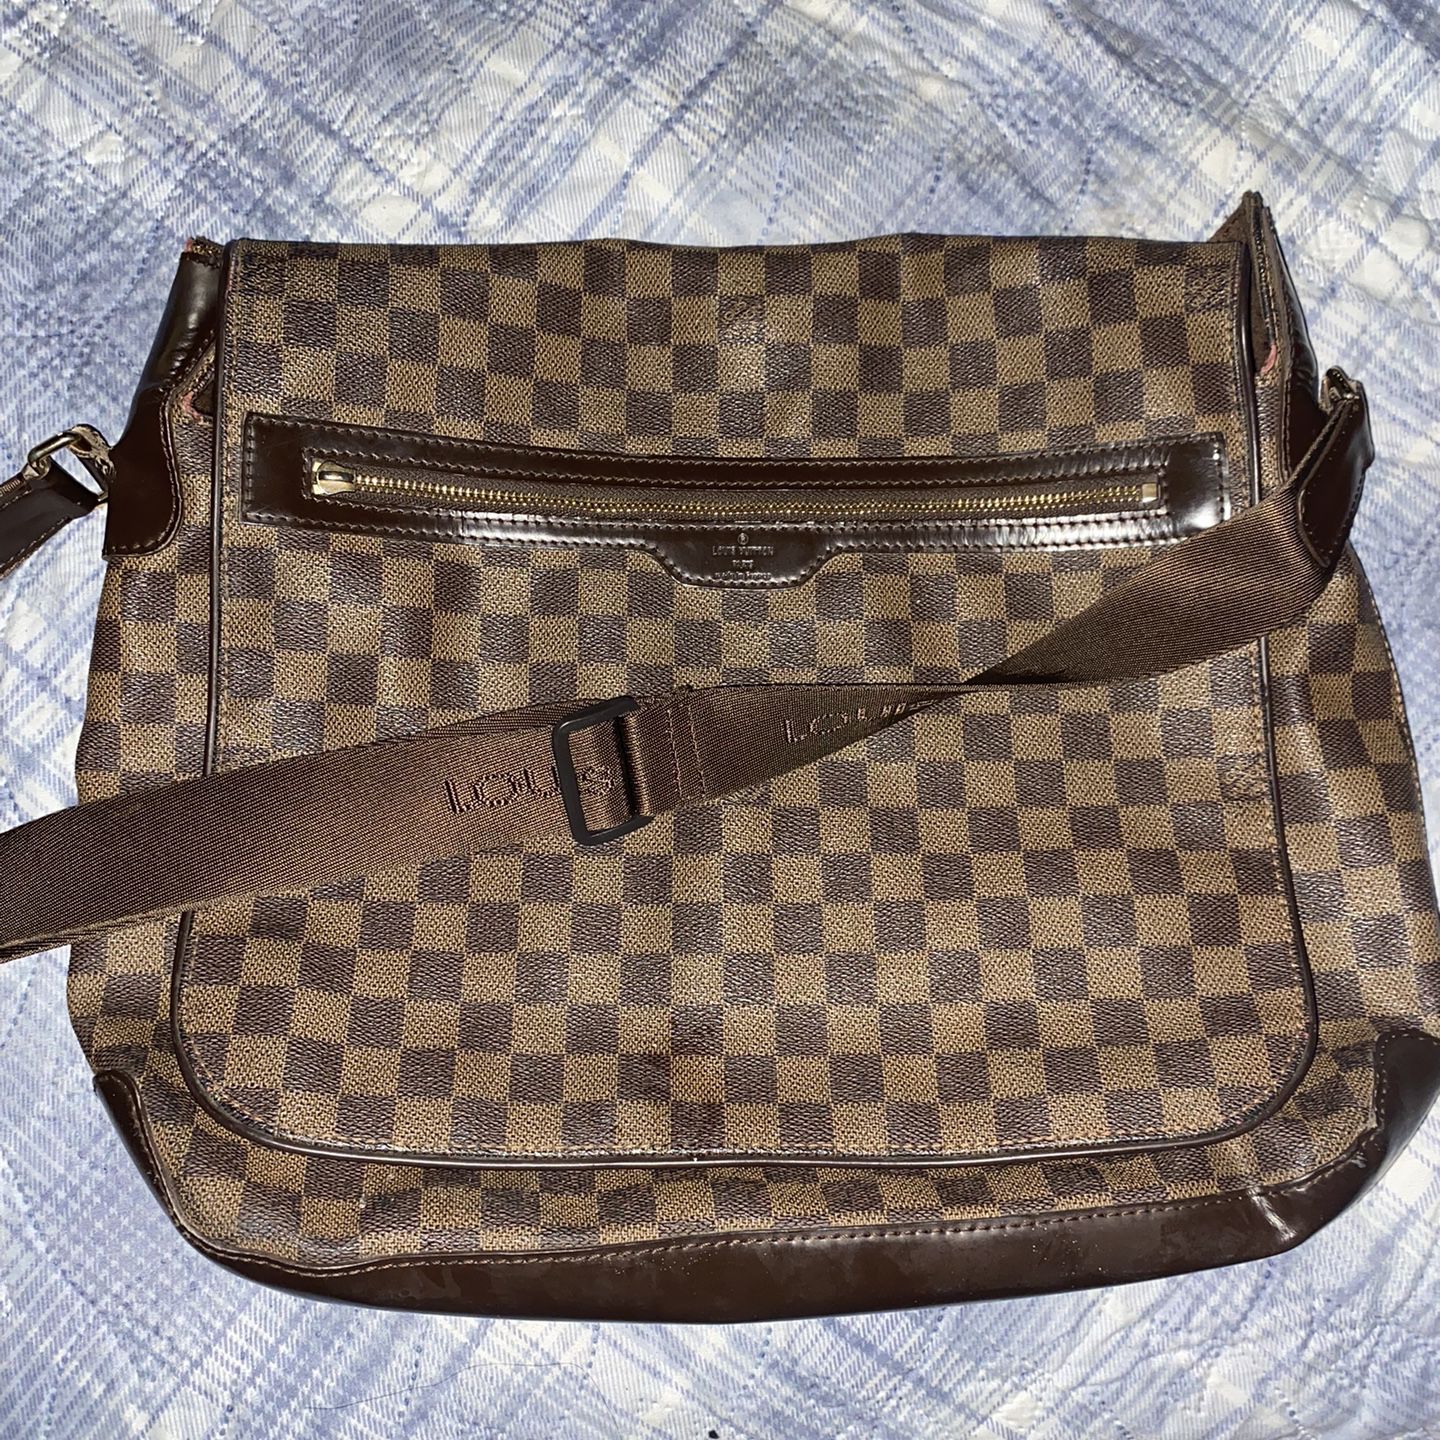 AUTHENTIC LOUIS VUITTON MESSENGER BAG! LARGE GUC for Sale in